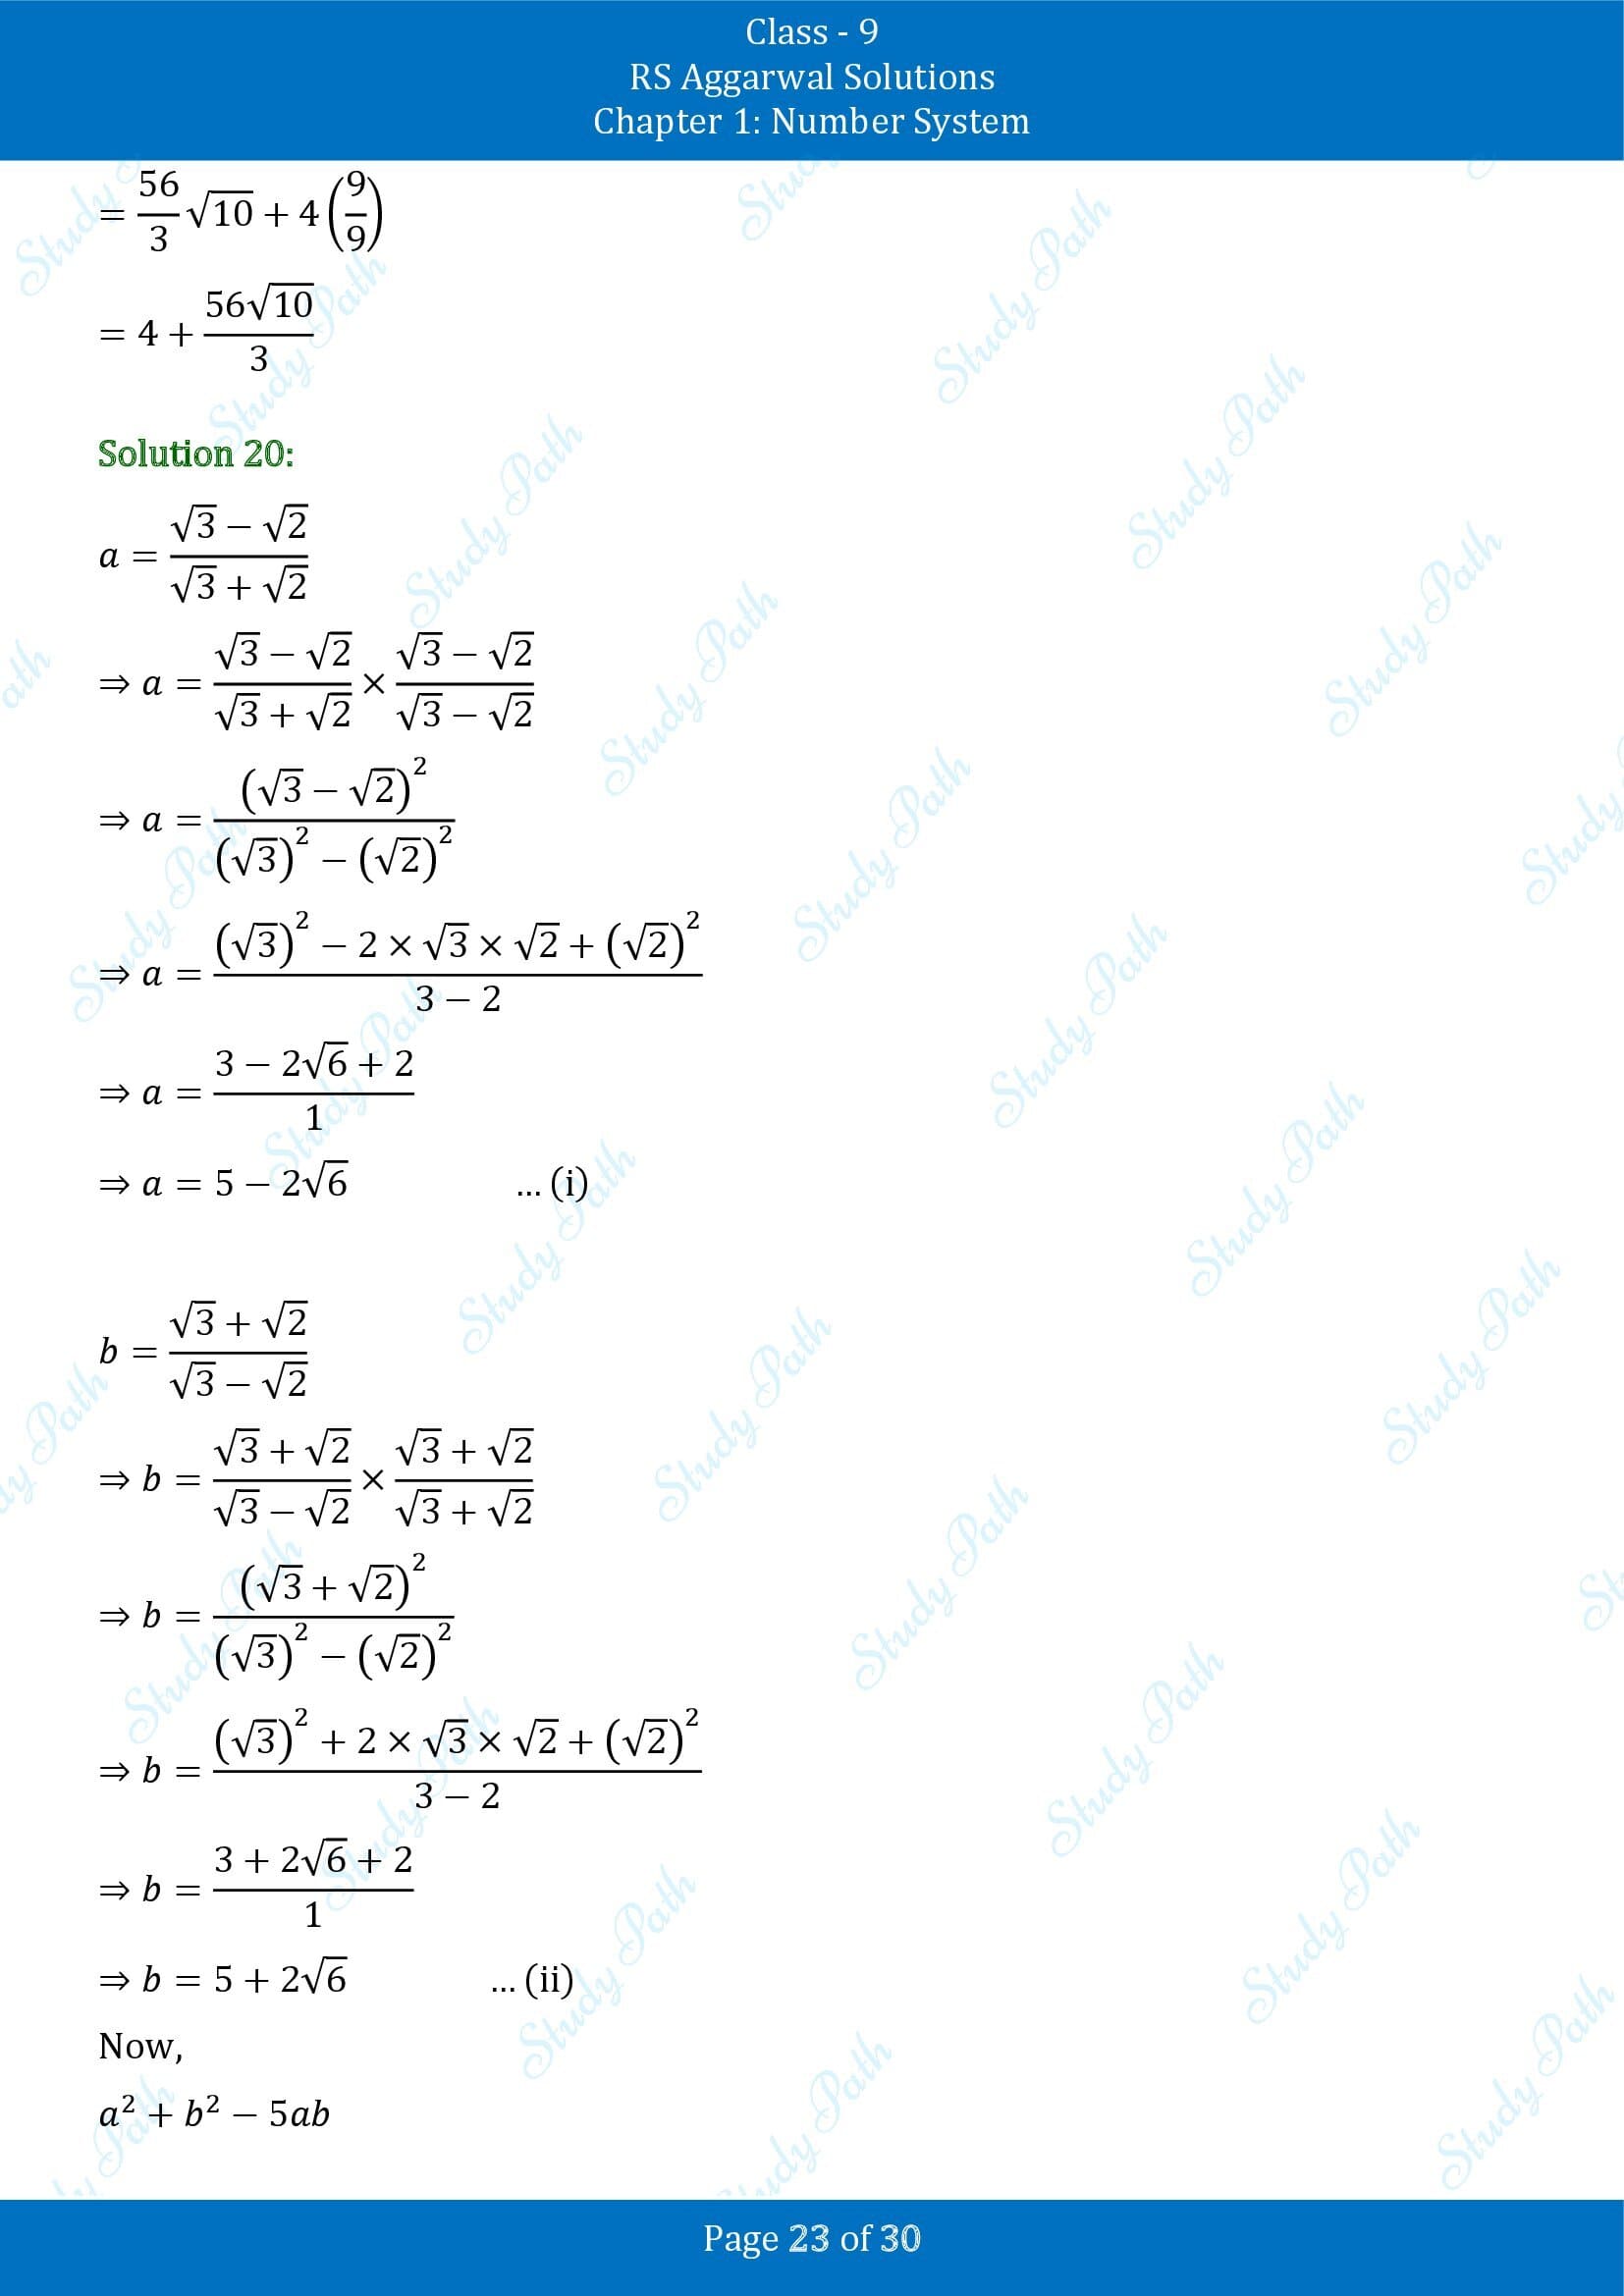 RS Aggarwal Solutions Class 9 Chapter 1 Number System Exercise 1F 00023